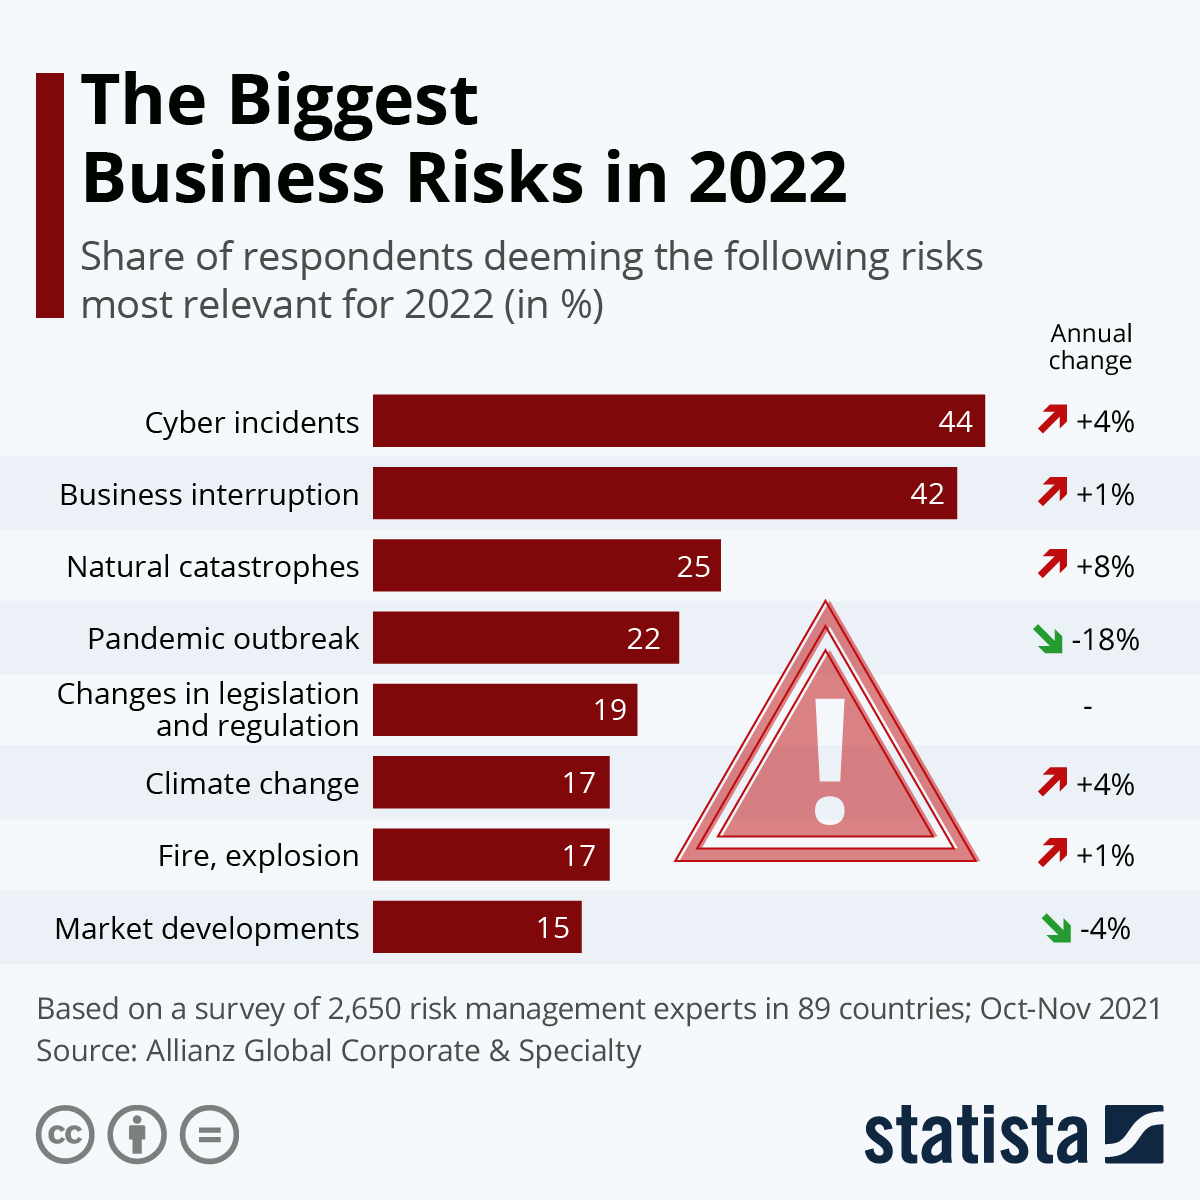 The Biggest Business Risks in 2022 Revealed